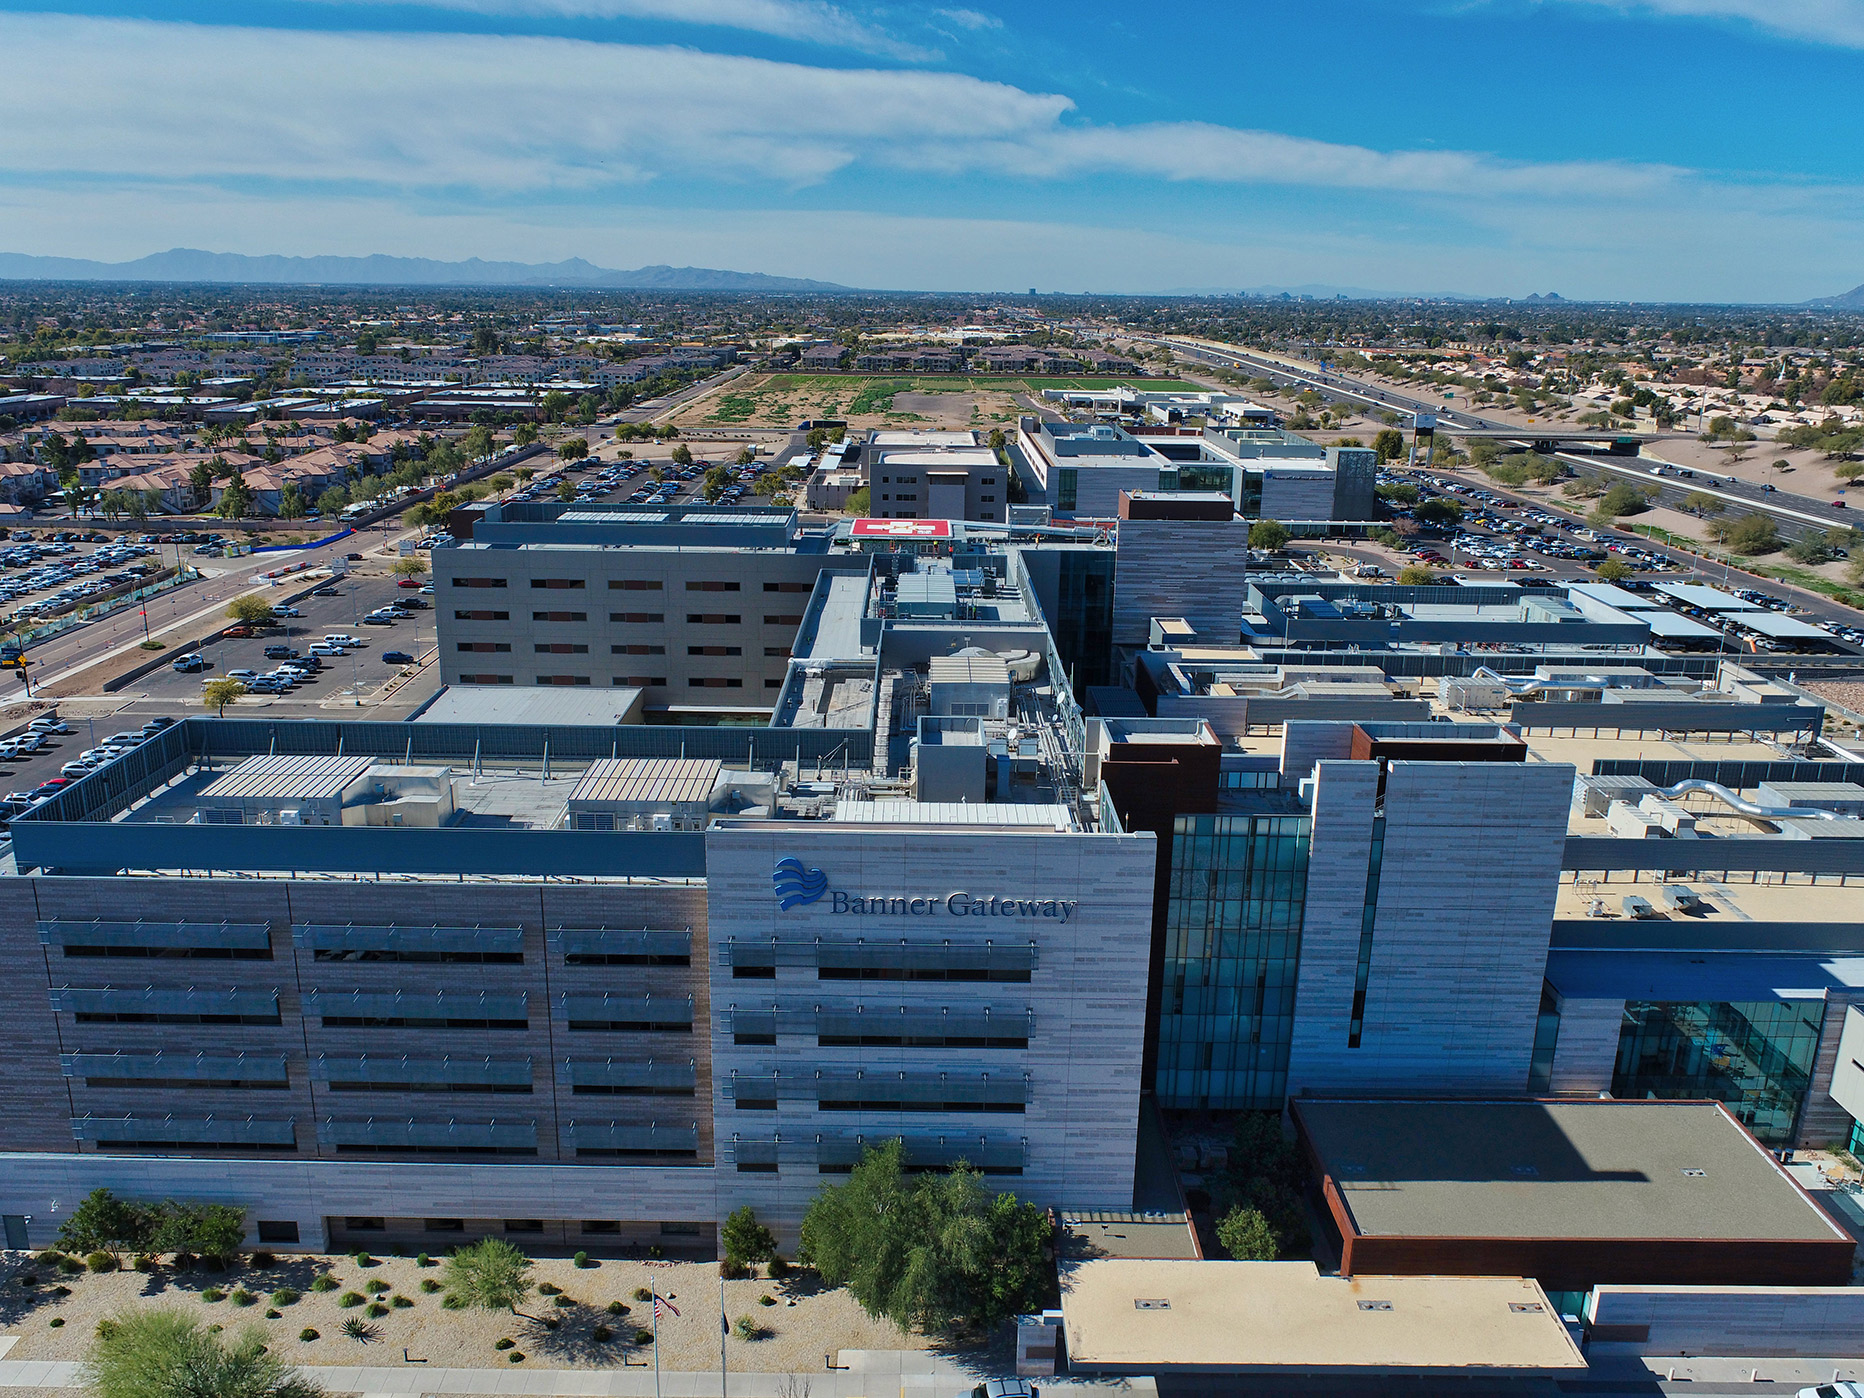 Banner Gateway Hospital in Gilbert, AZ. Both images courtesy of Sto Corp.